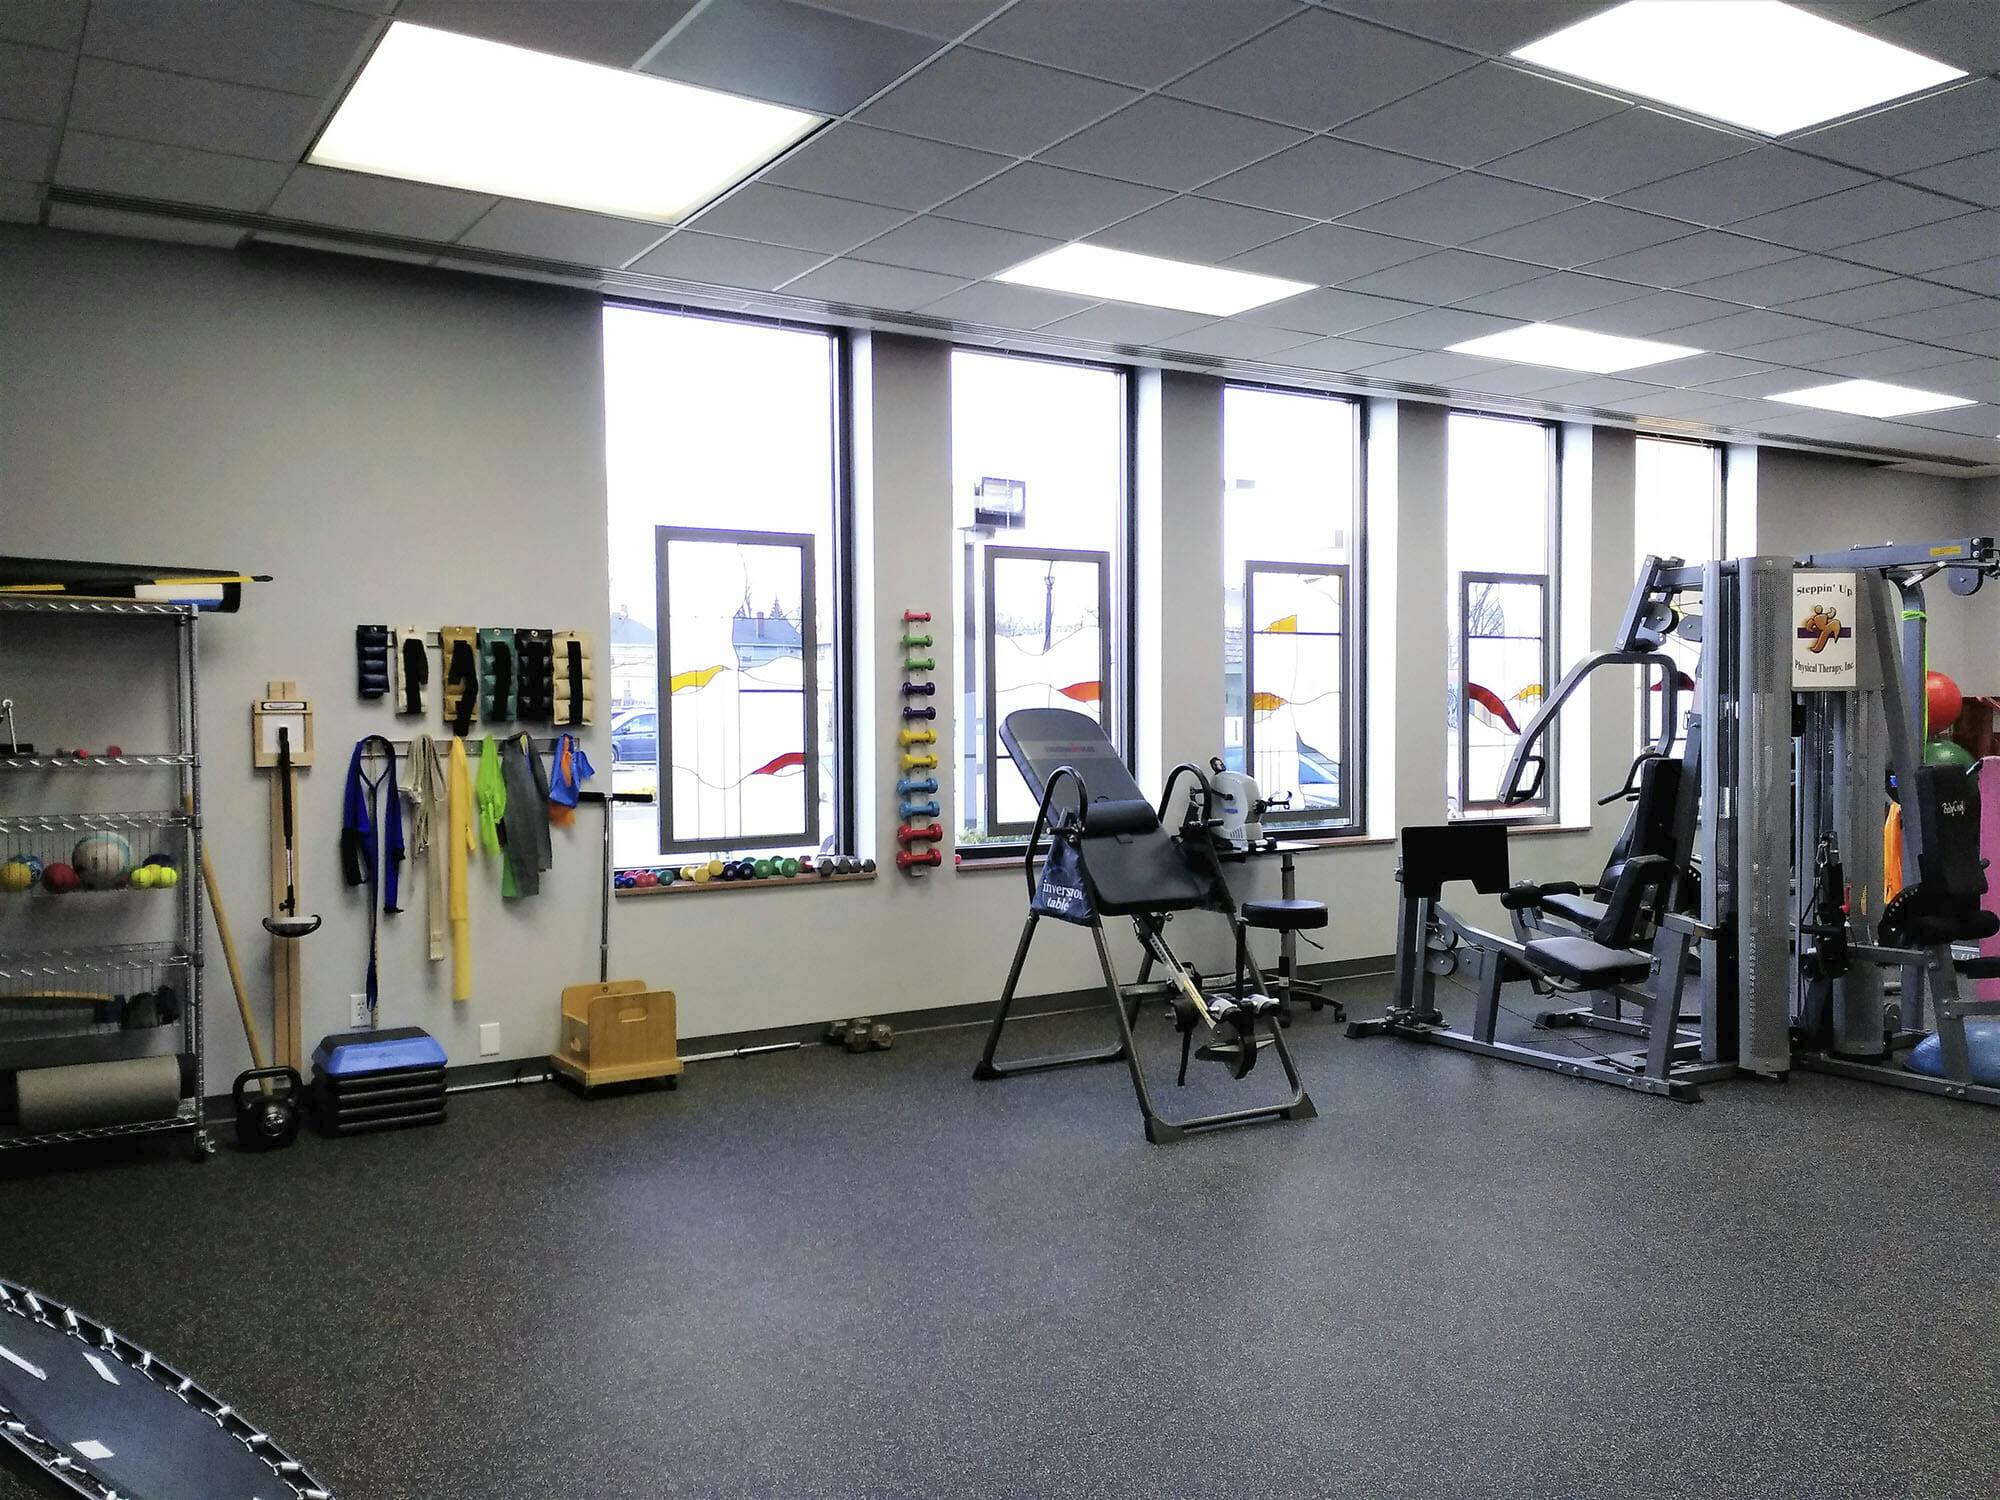 Steppin' Up Physical Therapy | Fort Wayne IN